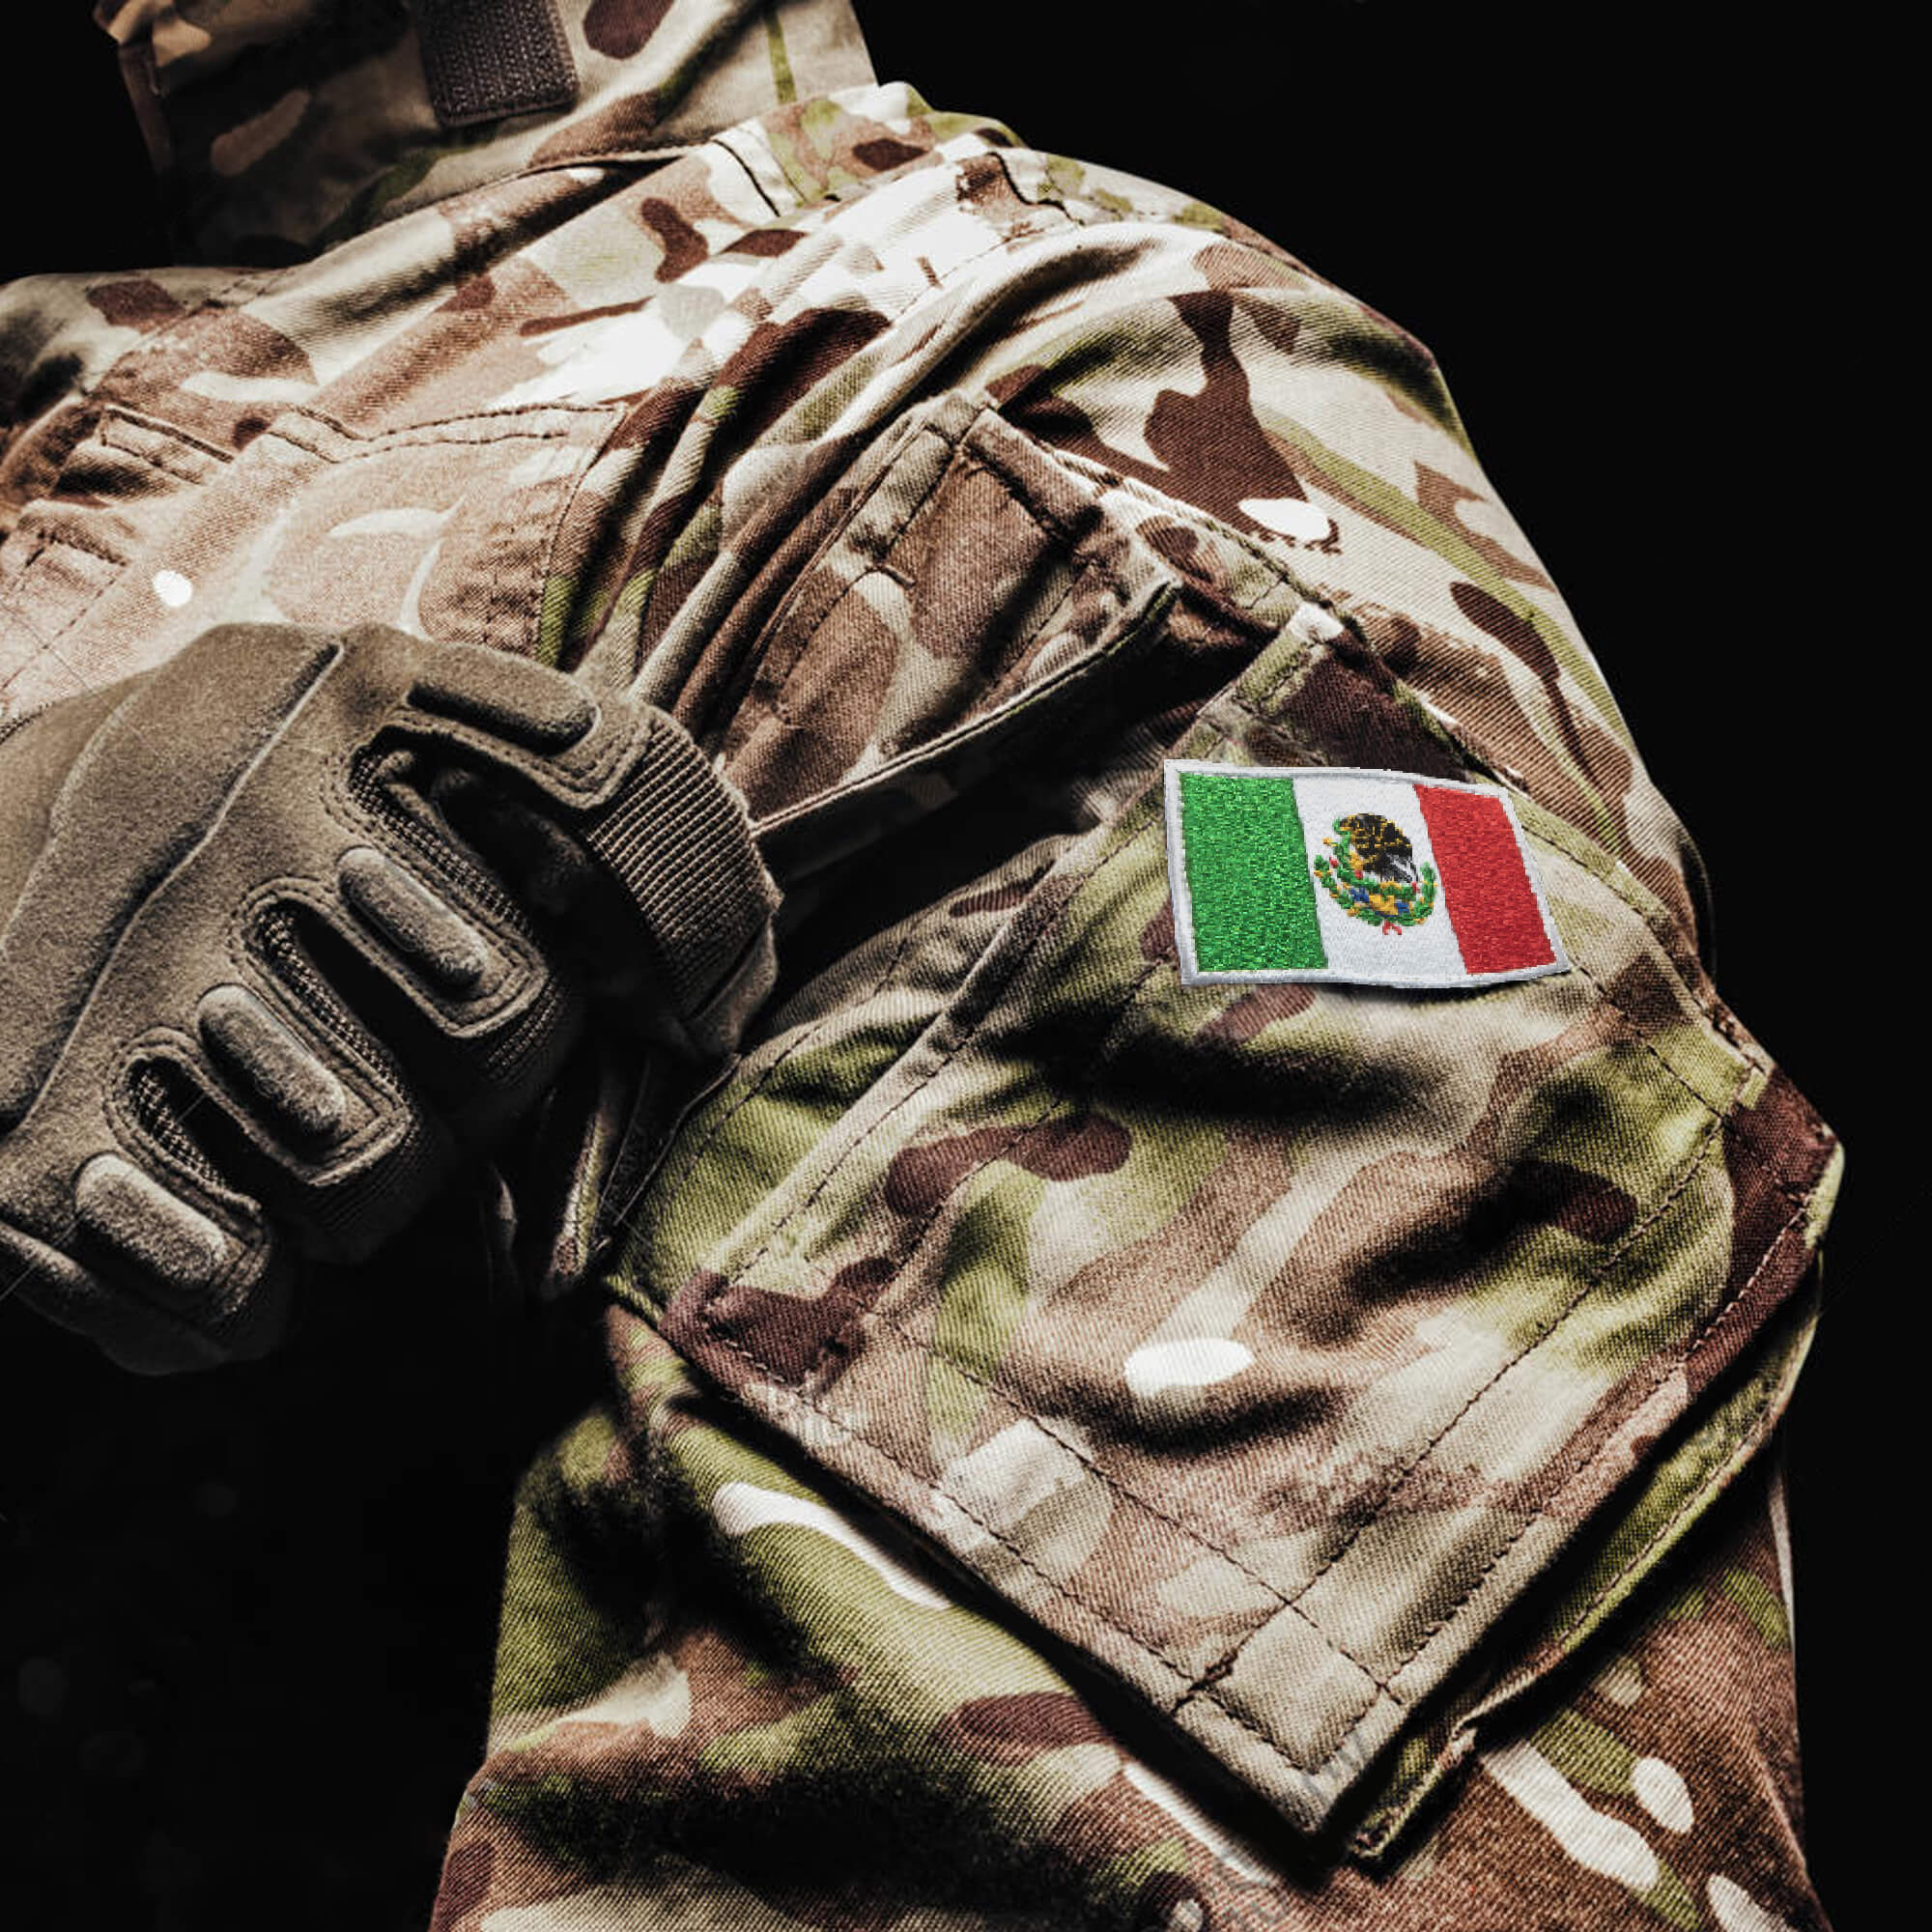 MEXICO Flag Patch W/ VELCRO® Brand Fastener Morale Tactical Emblem